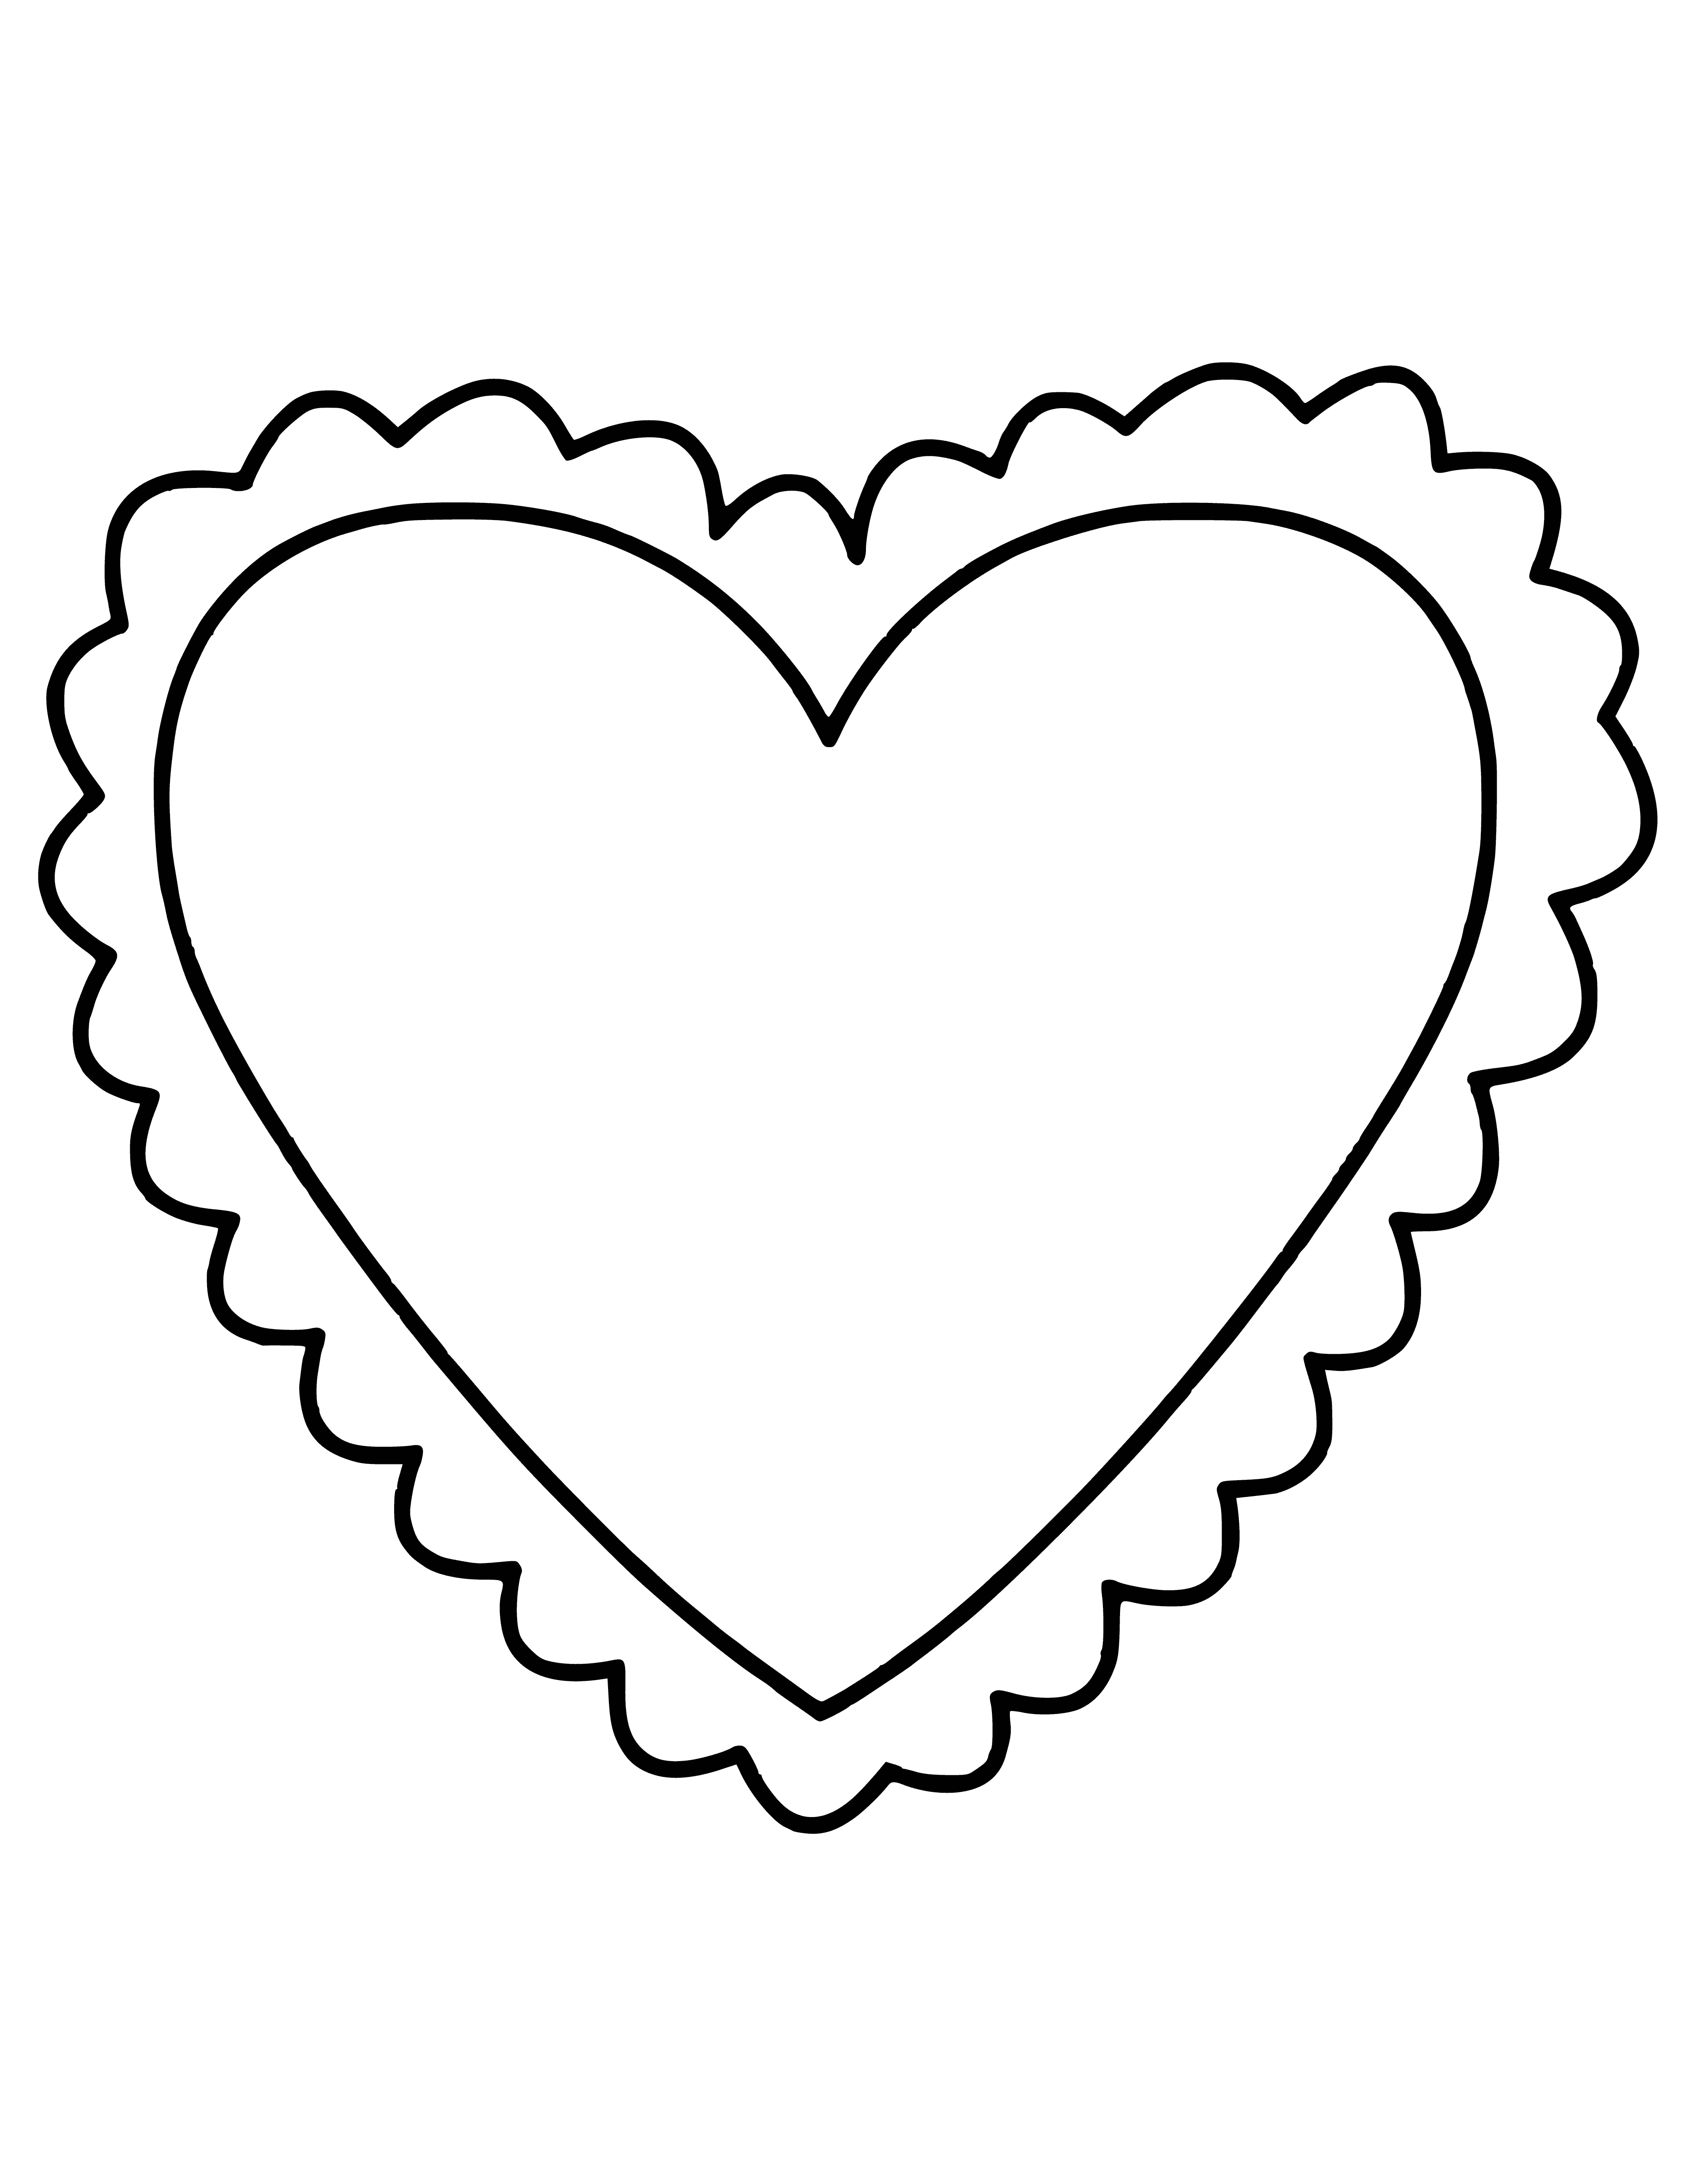 coloring page: A Valentine's Day coloring page featuring a red heart with diagonal white stripes and "Happy Valentine's Day" above. Red hearts scattered around. #ValentinesDay